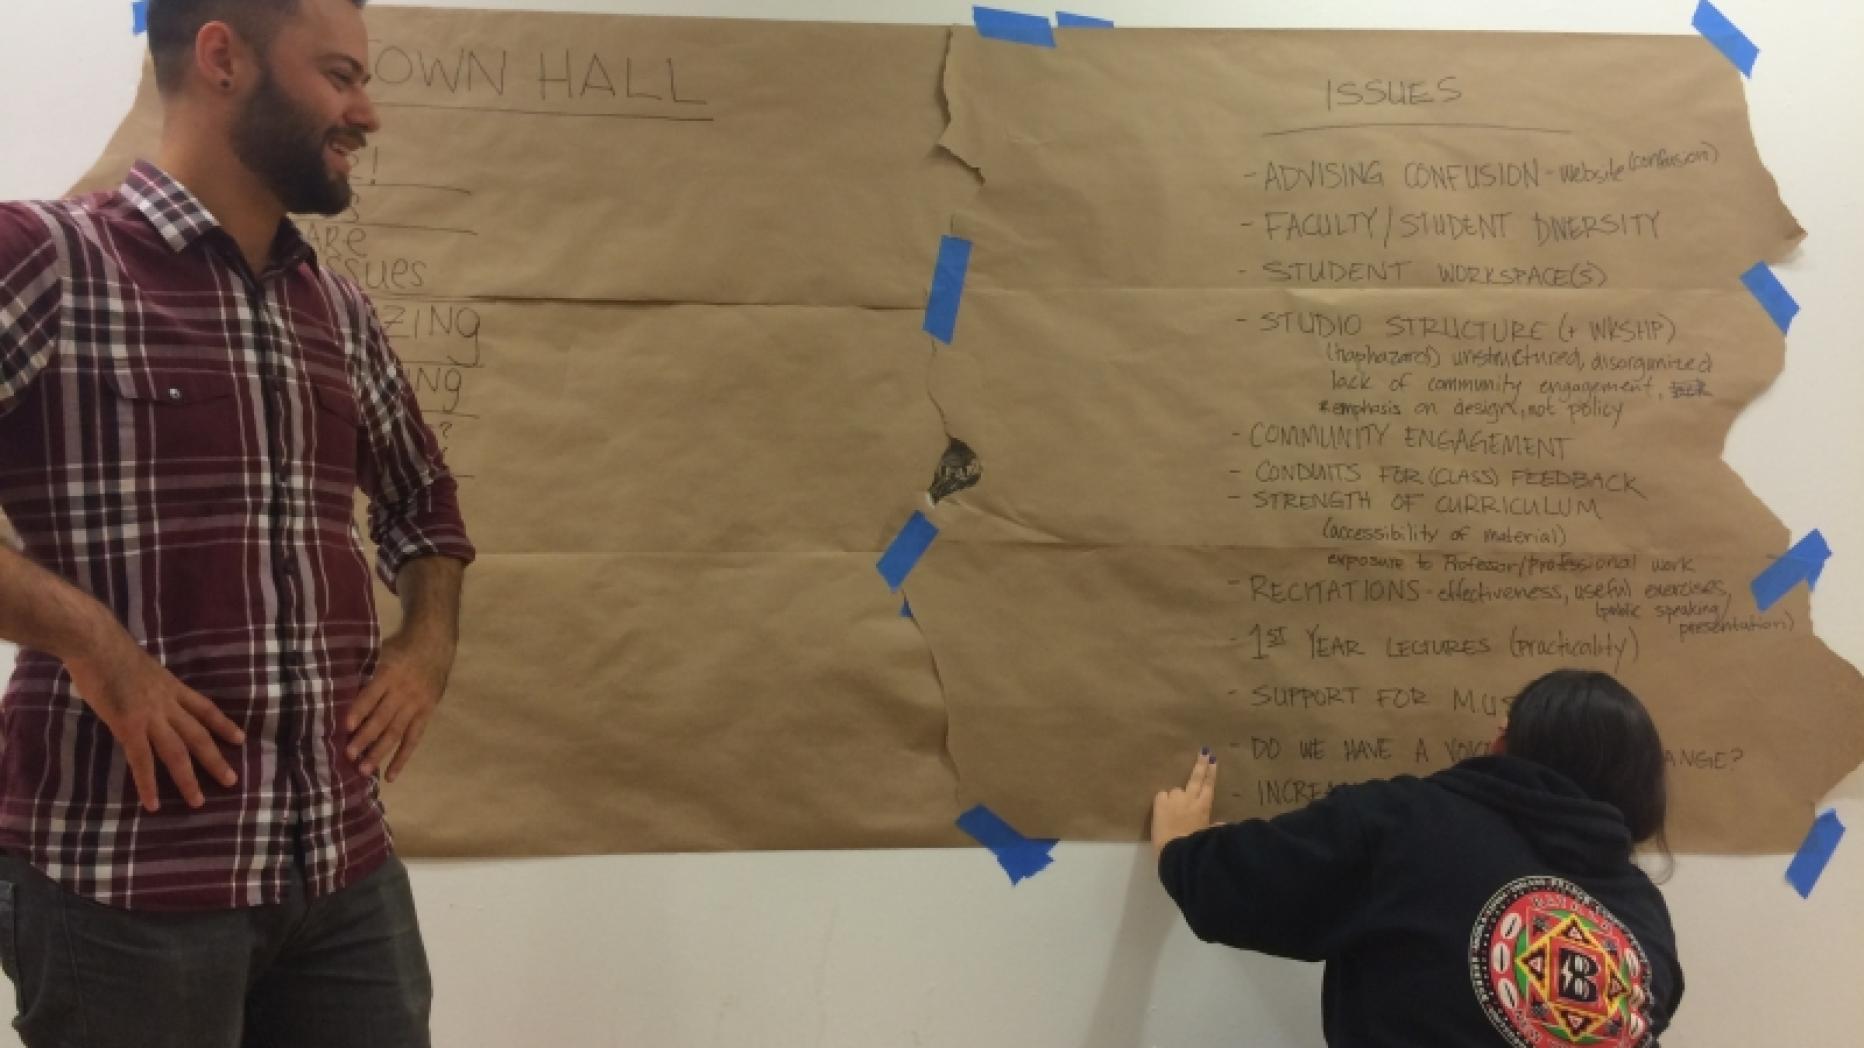 Students posting message board for town hall meeting.